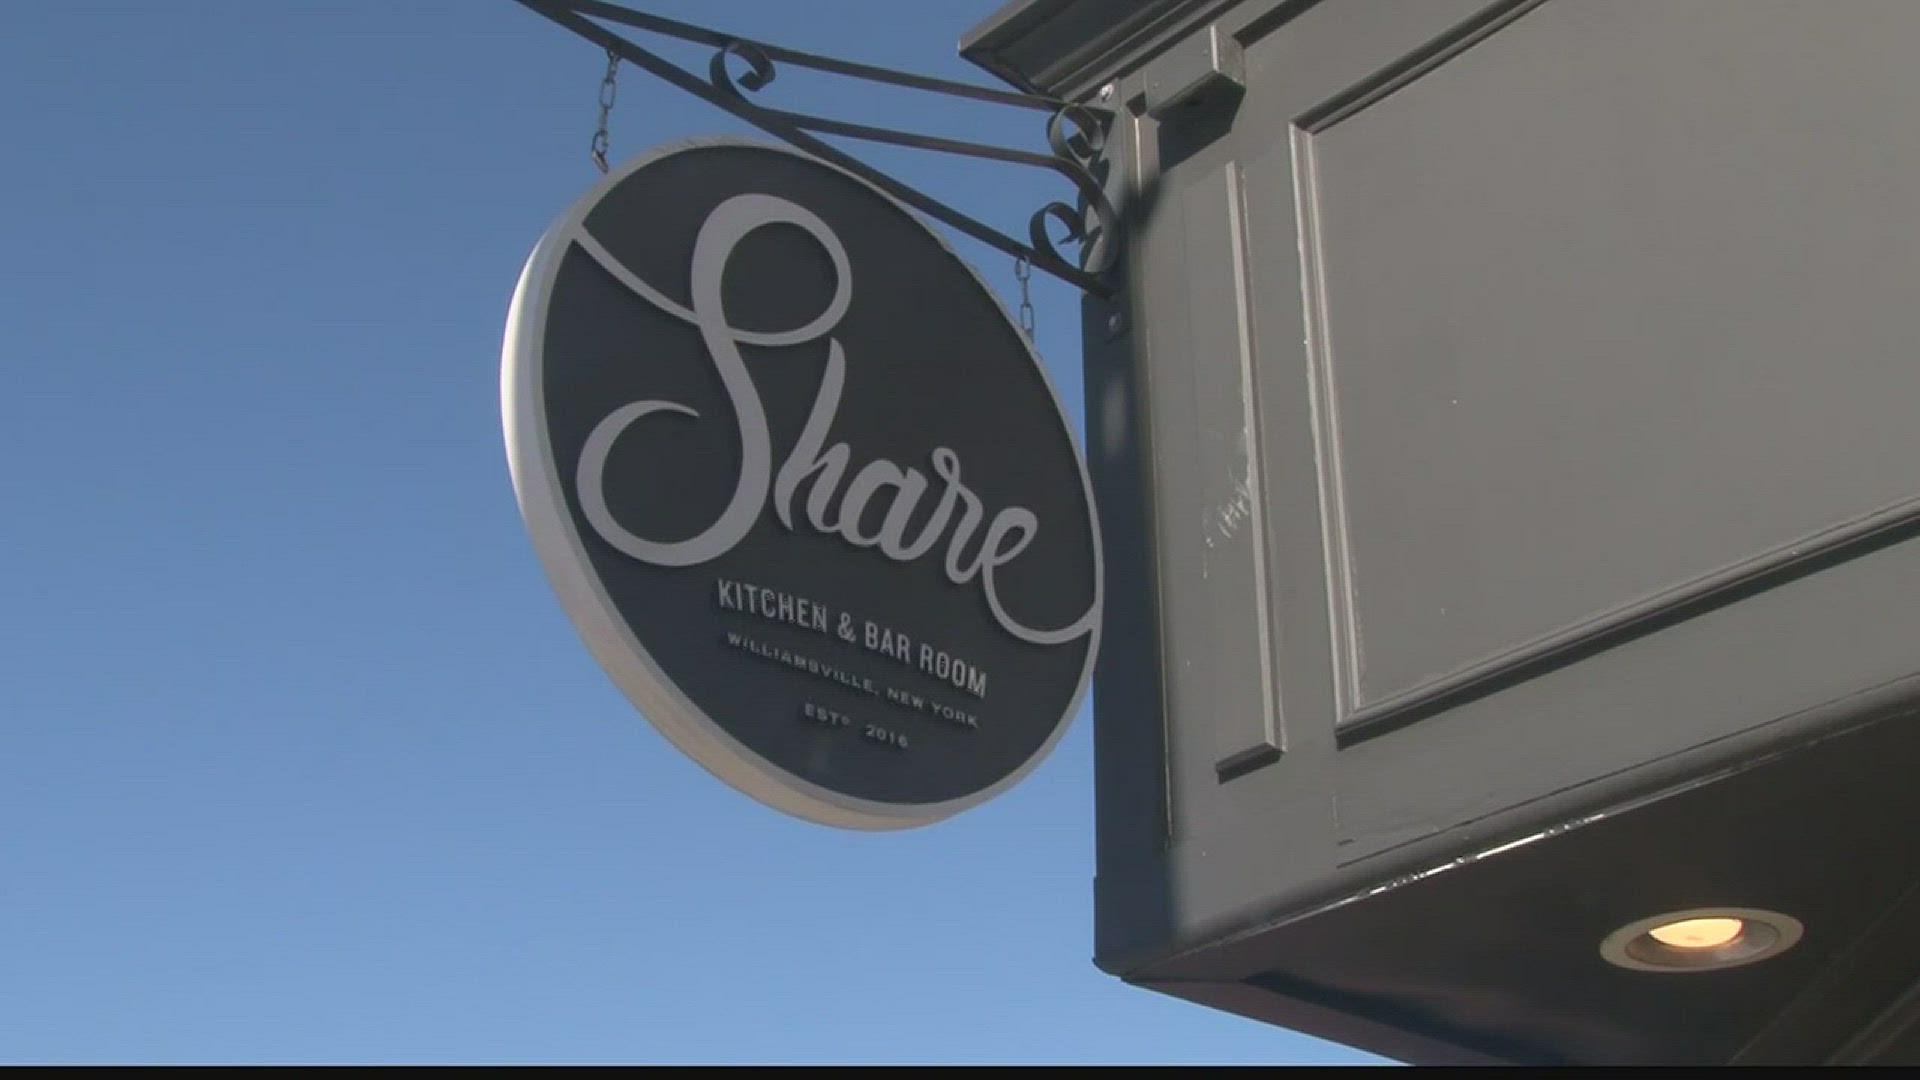 Stephanie Barnes Unique Eats at Share Kitchen and Bar Room